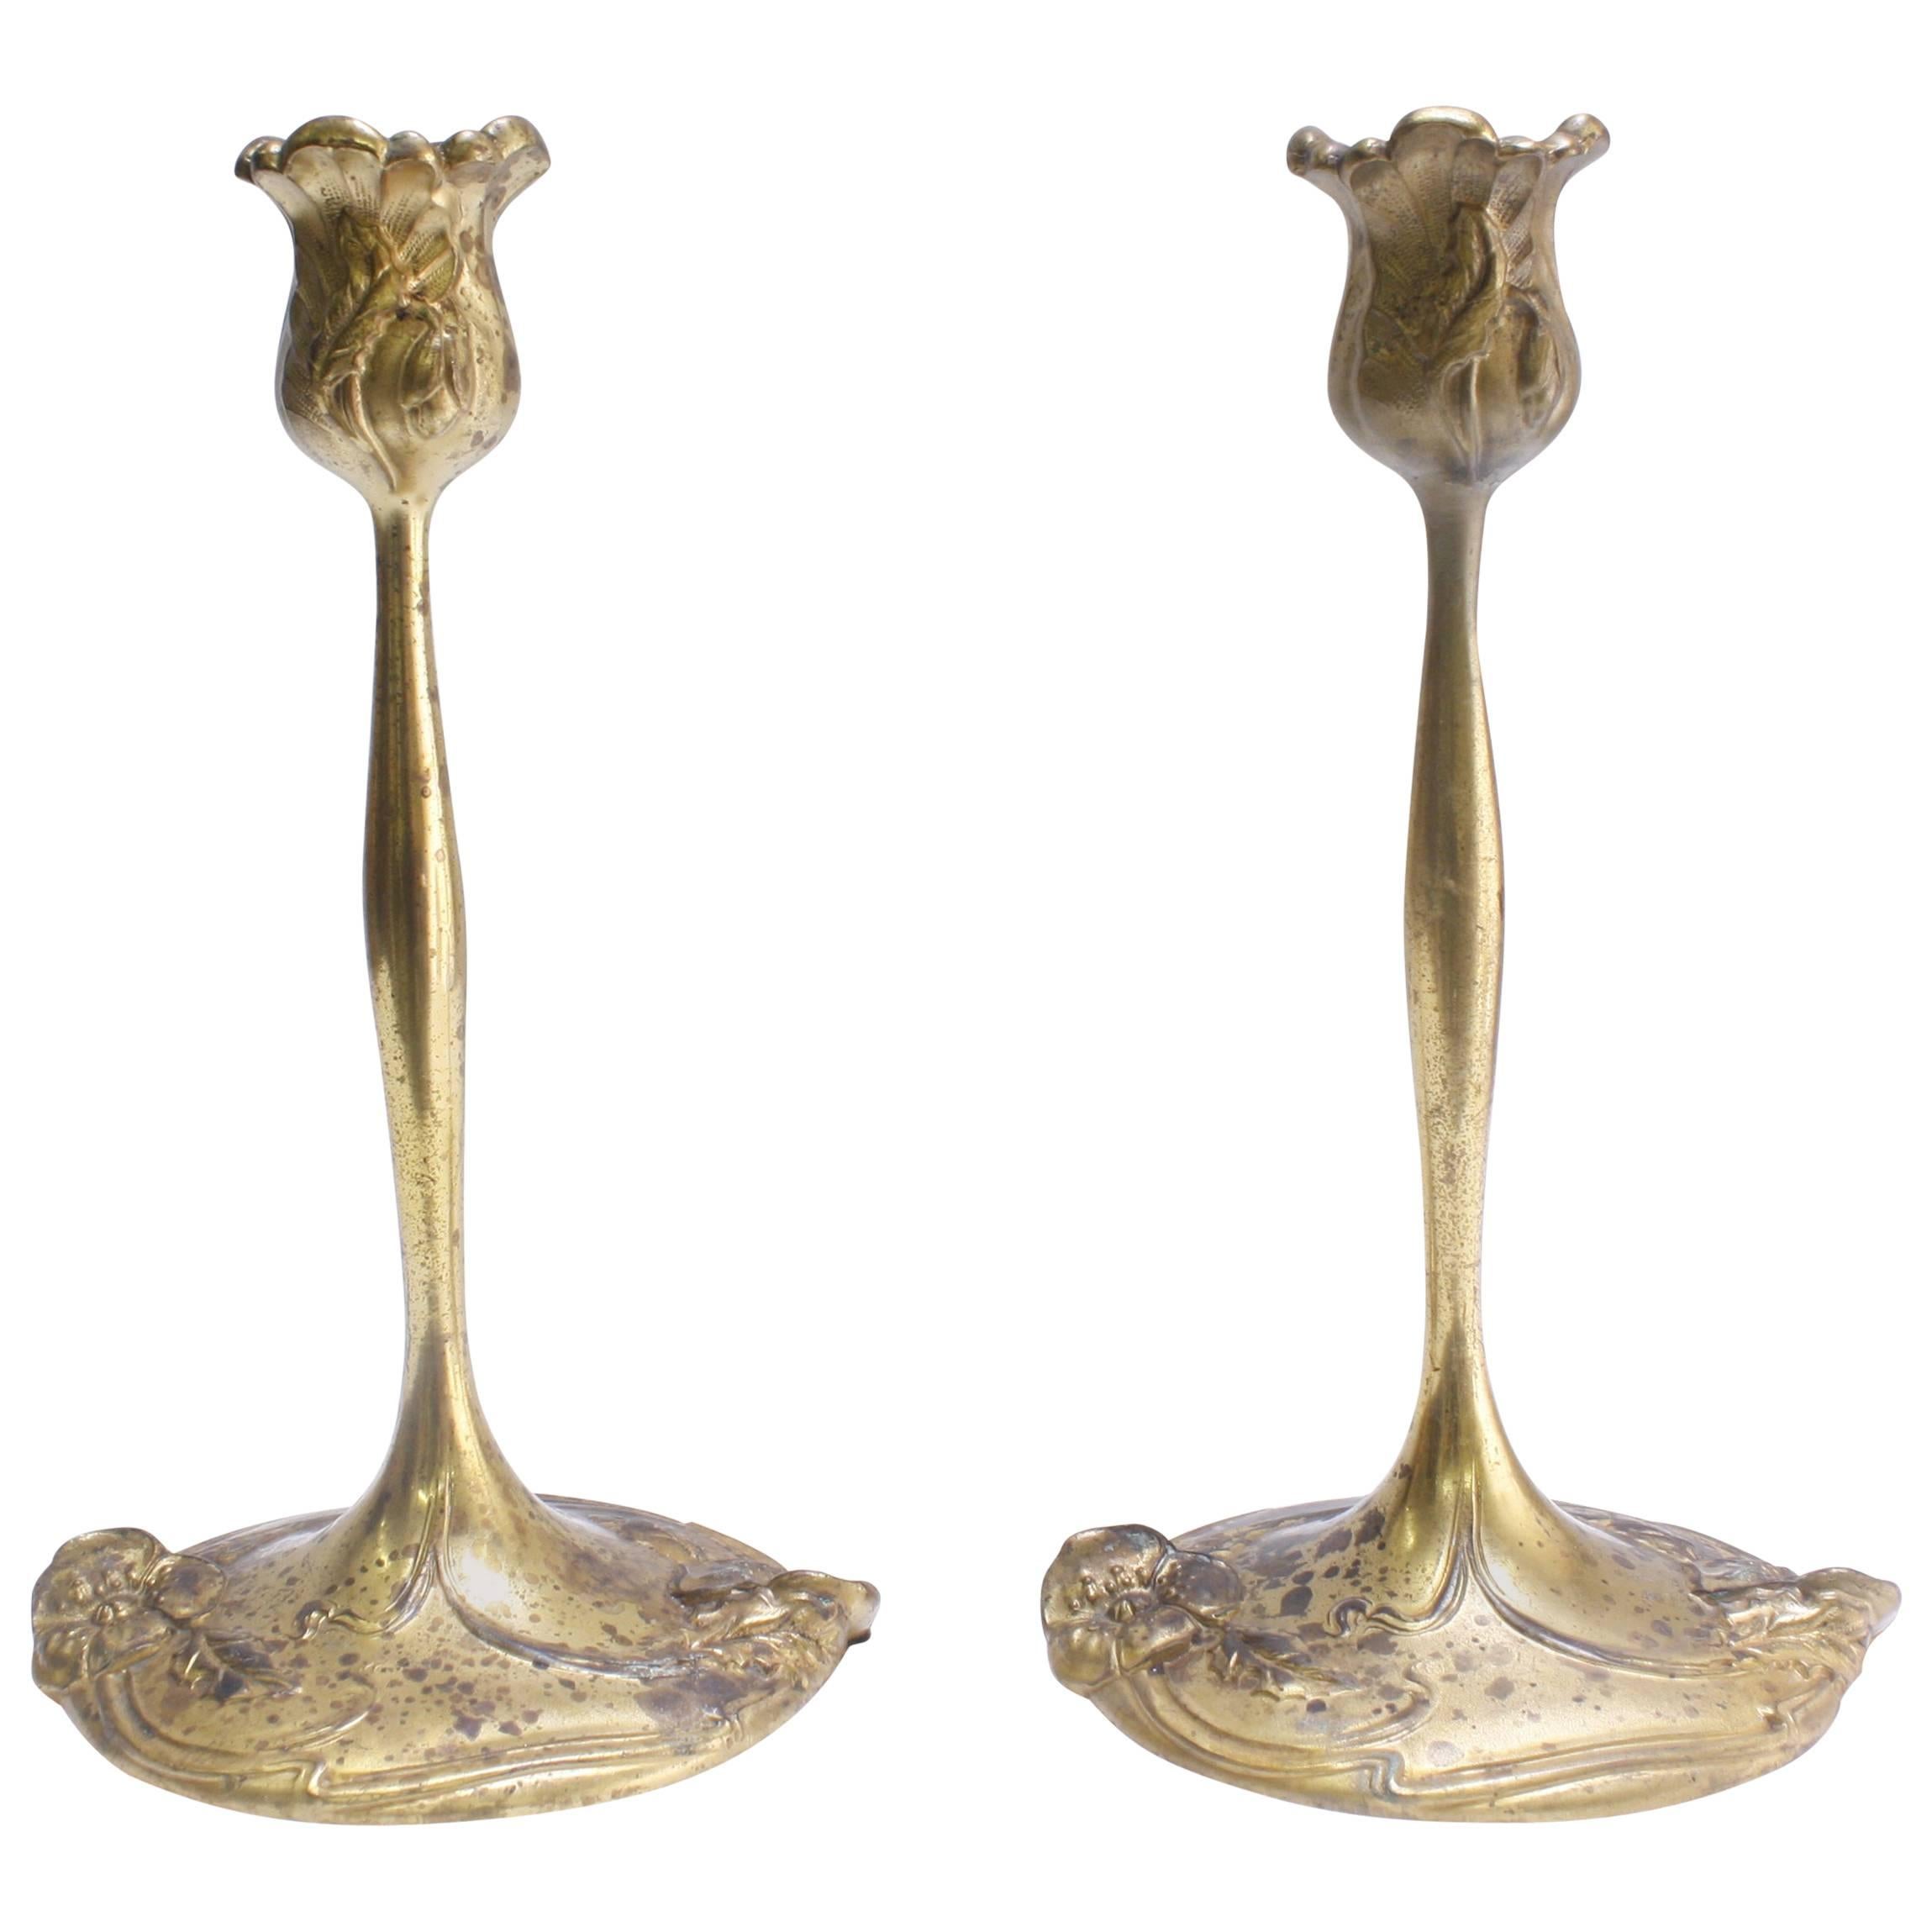 Pair of French Art Nouveau-Style Candlesticks